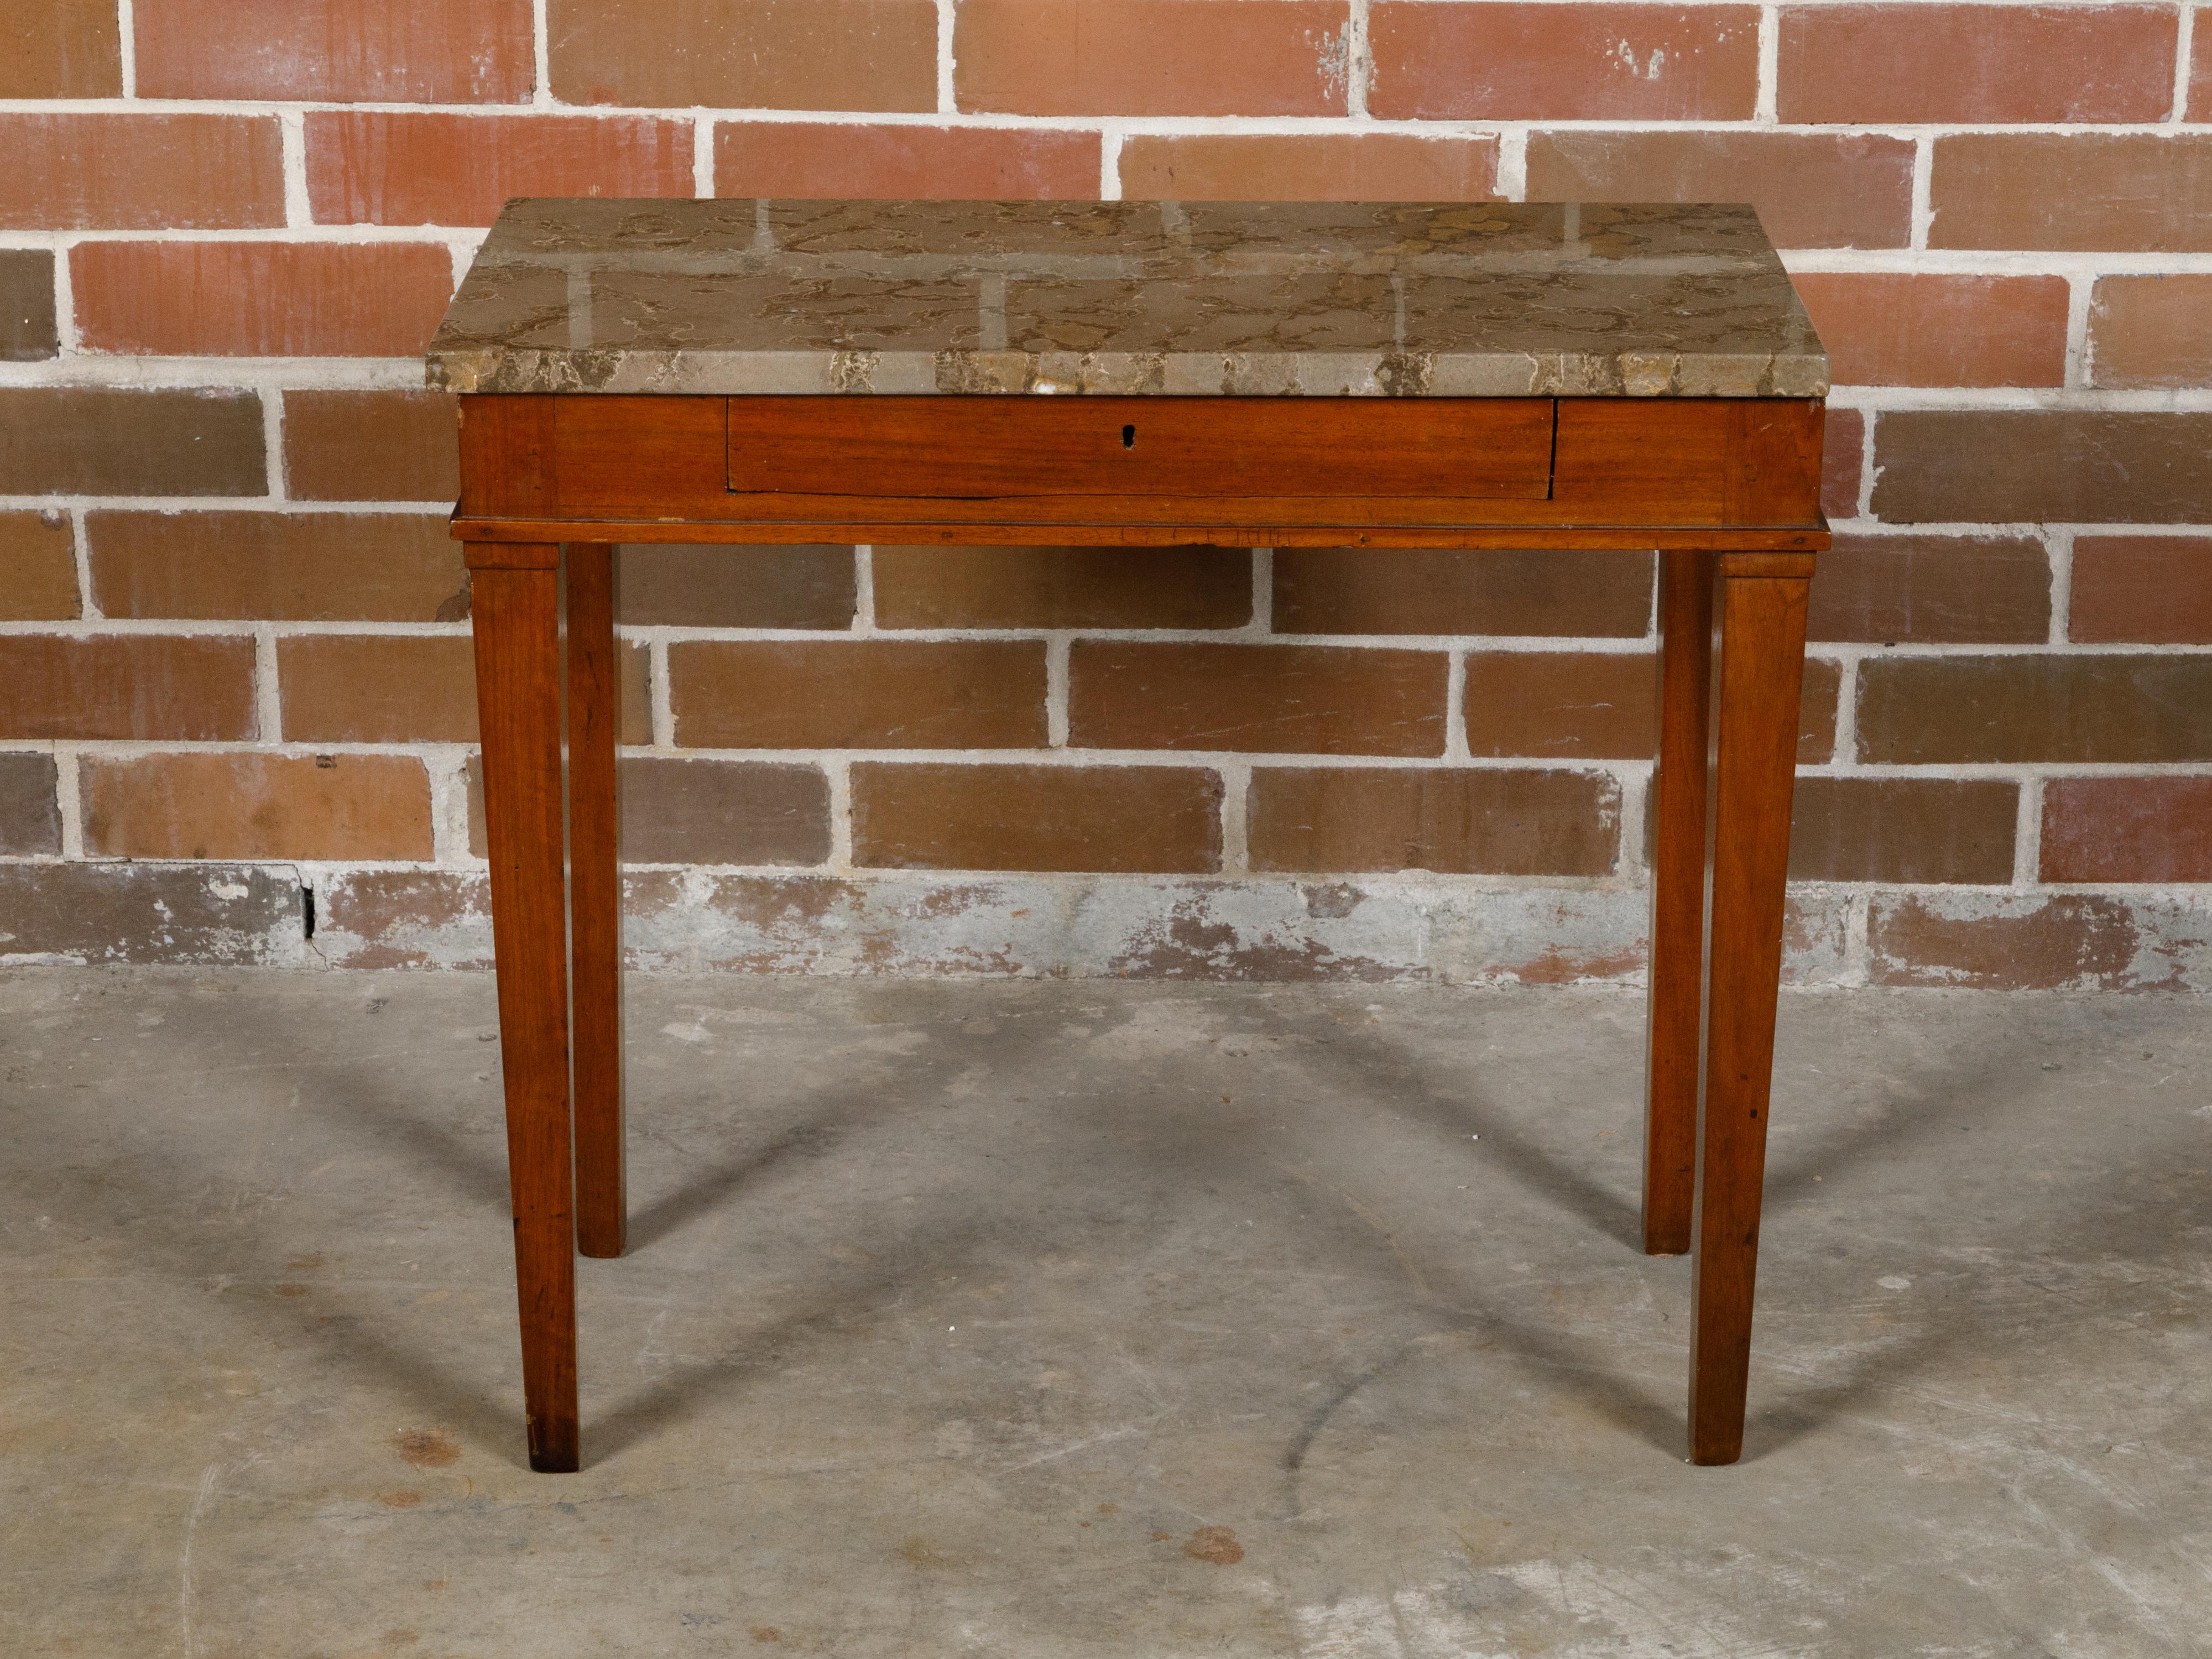 A French walnut console table from the 19th century with rectangular variegated marble top, single drawer and tapered legs. This French walnut console table from the 19th century is a piece of timeless elegance, seamlessly blending classic design